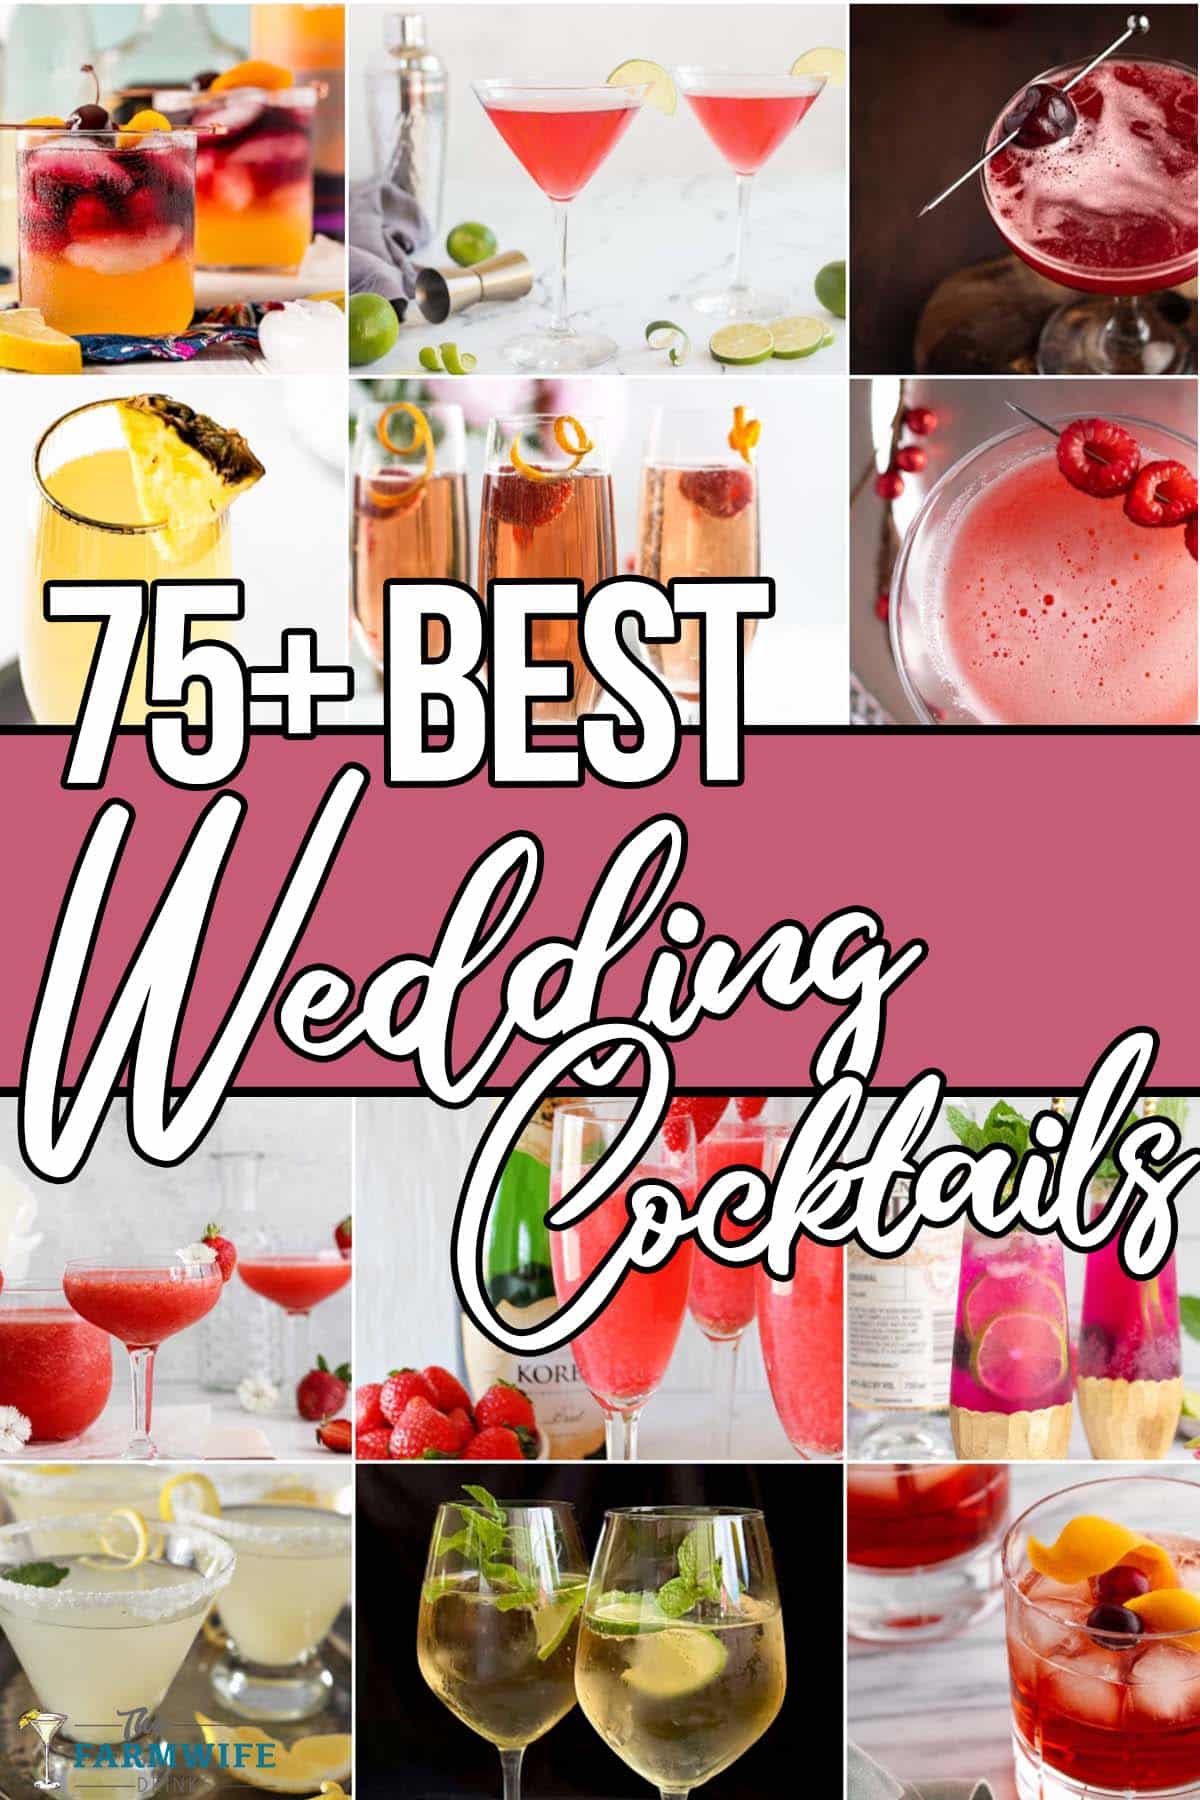 photo collage of easy wedding refreshment ideas with text which reads 75+ best wedding cocktails